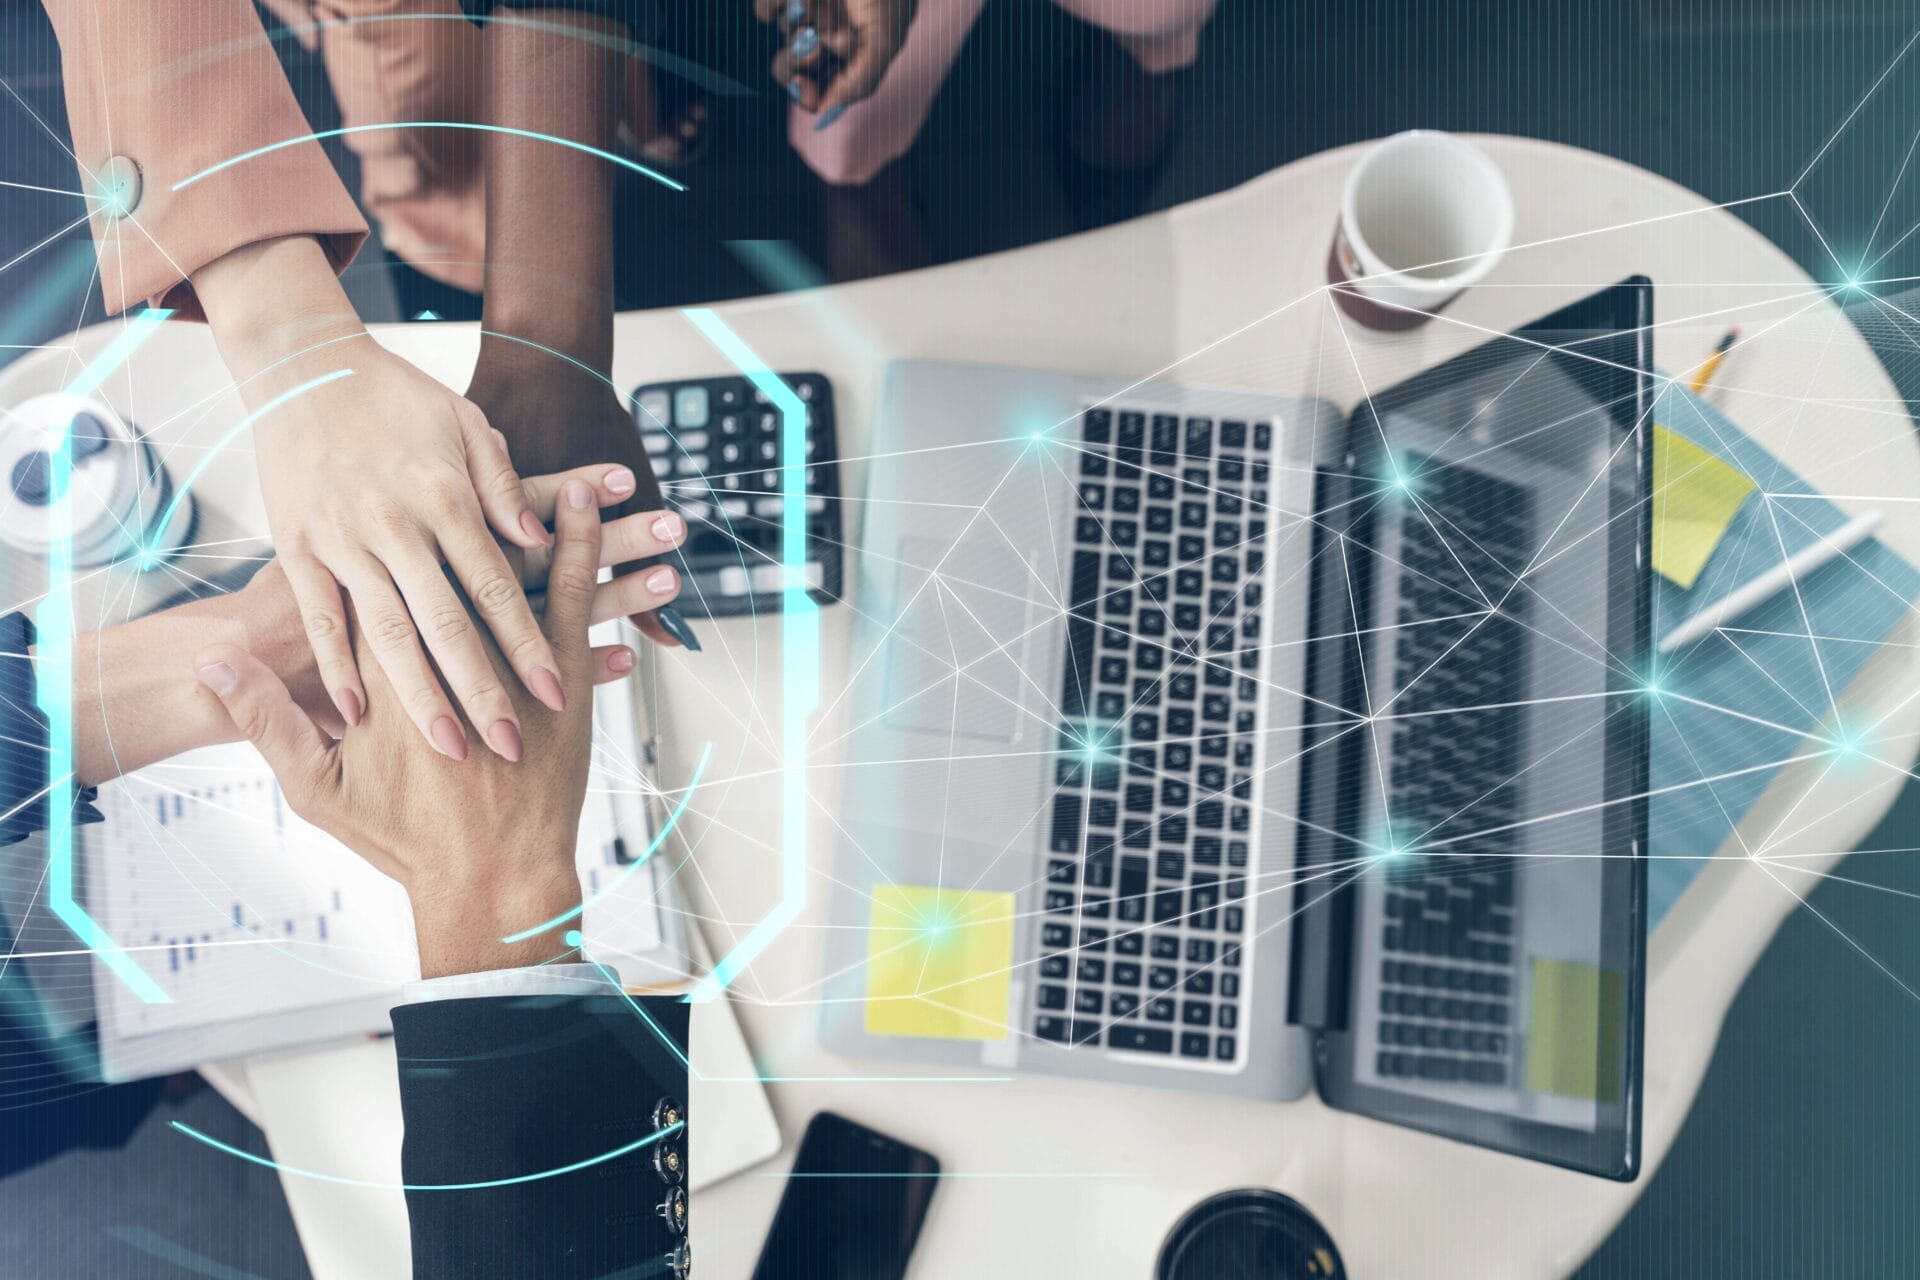 This image shows a team of professionals stacking hands over a worktable, symbolizing unity and teamwork, with a digital overlay of network connections, emphasizing collaboration in a modern, tech-driven environment.